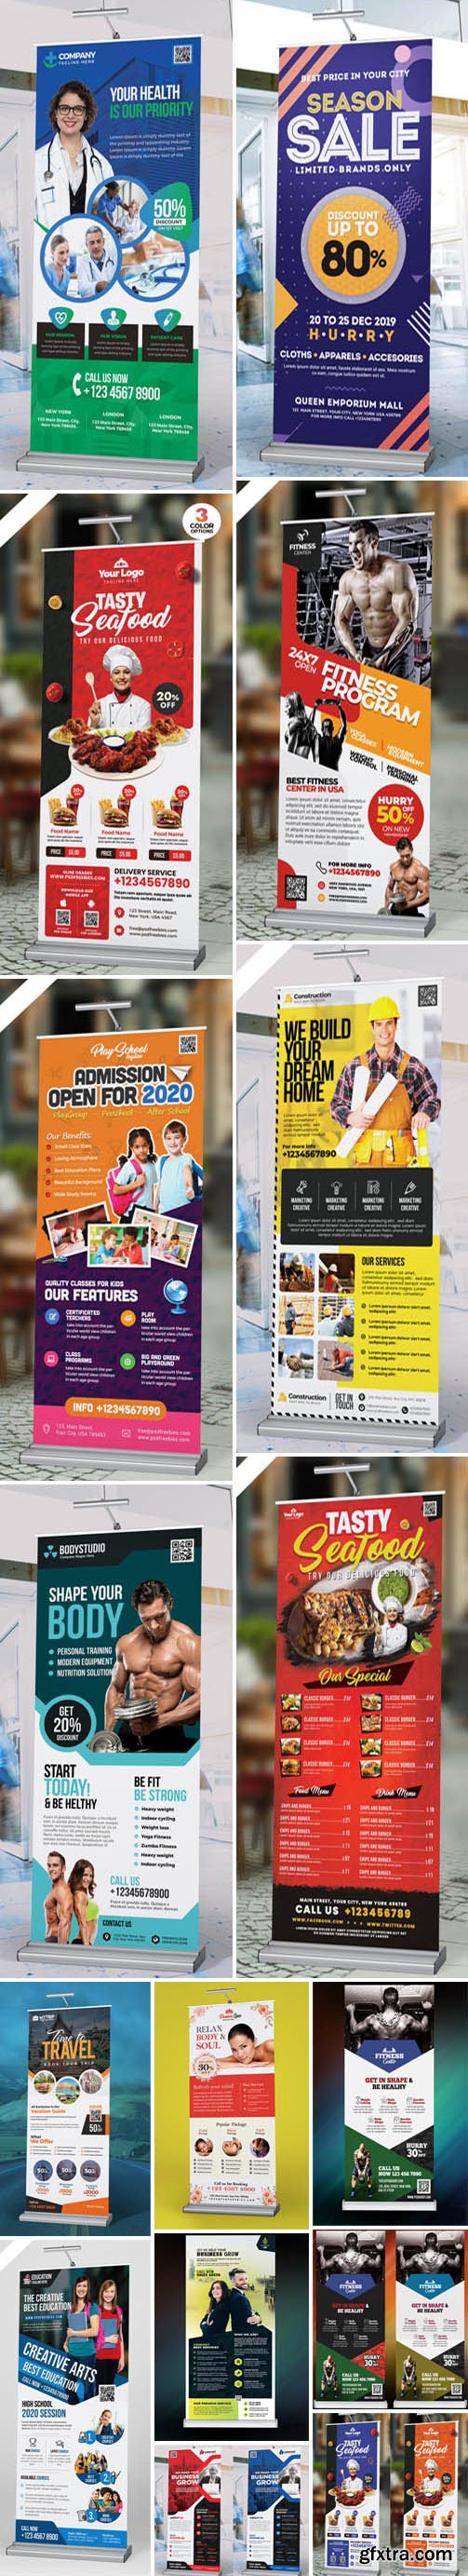 Multipurpose Advertising Roll-Up Banners PSD Collection